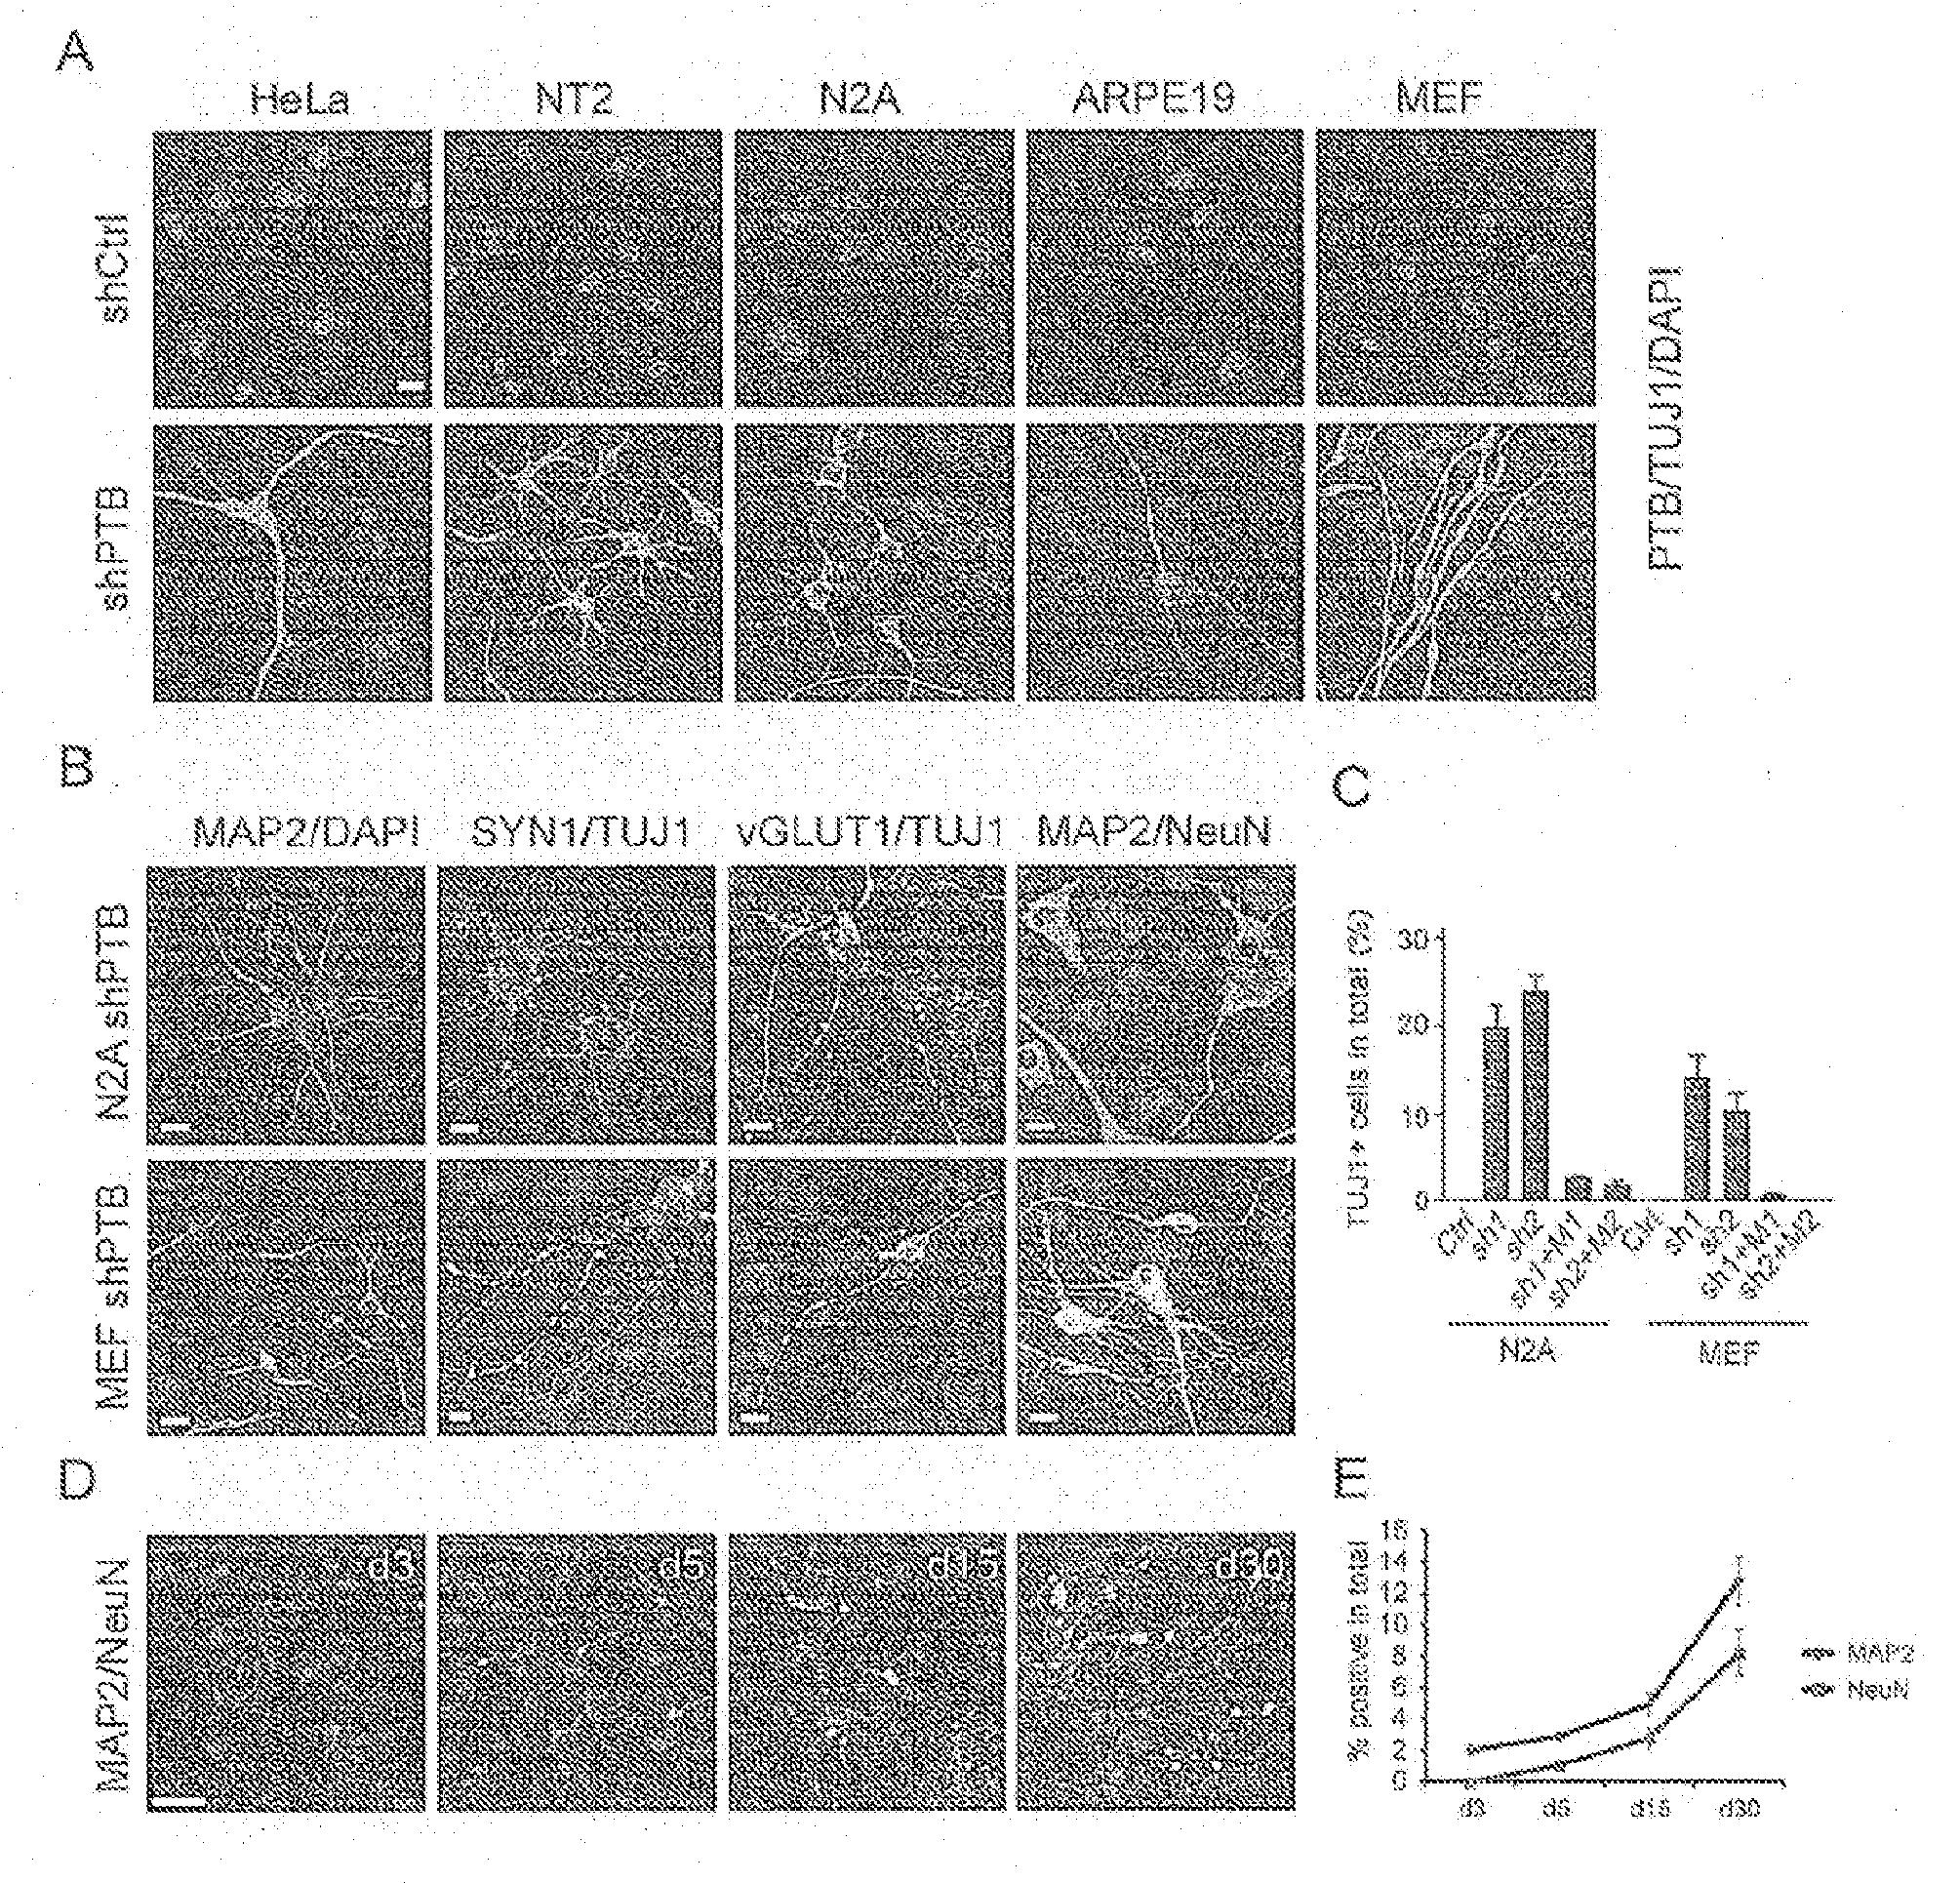 Methods for engineering non-neuronal cells into neurons and using newly engineered neurons to treat neurodegenerative diseases